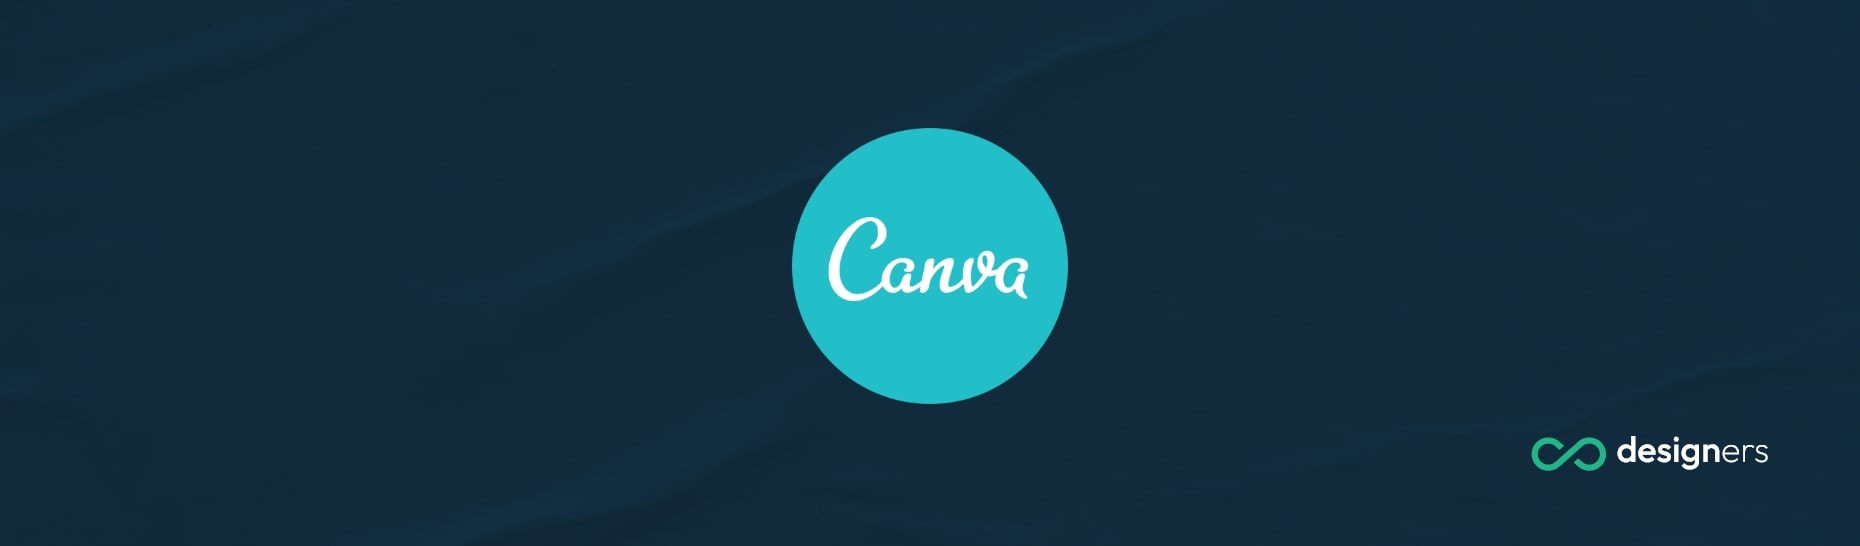 Does Canva Work on Macbook Pro?